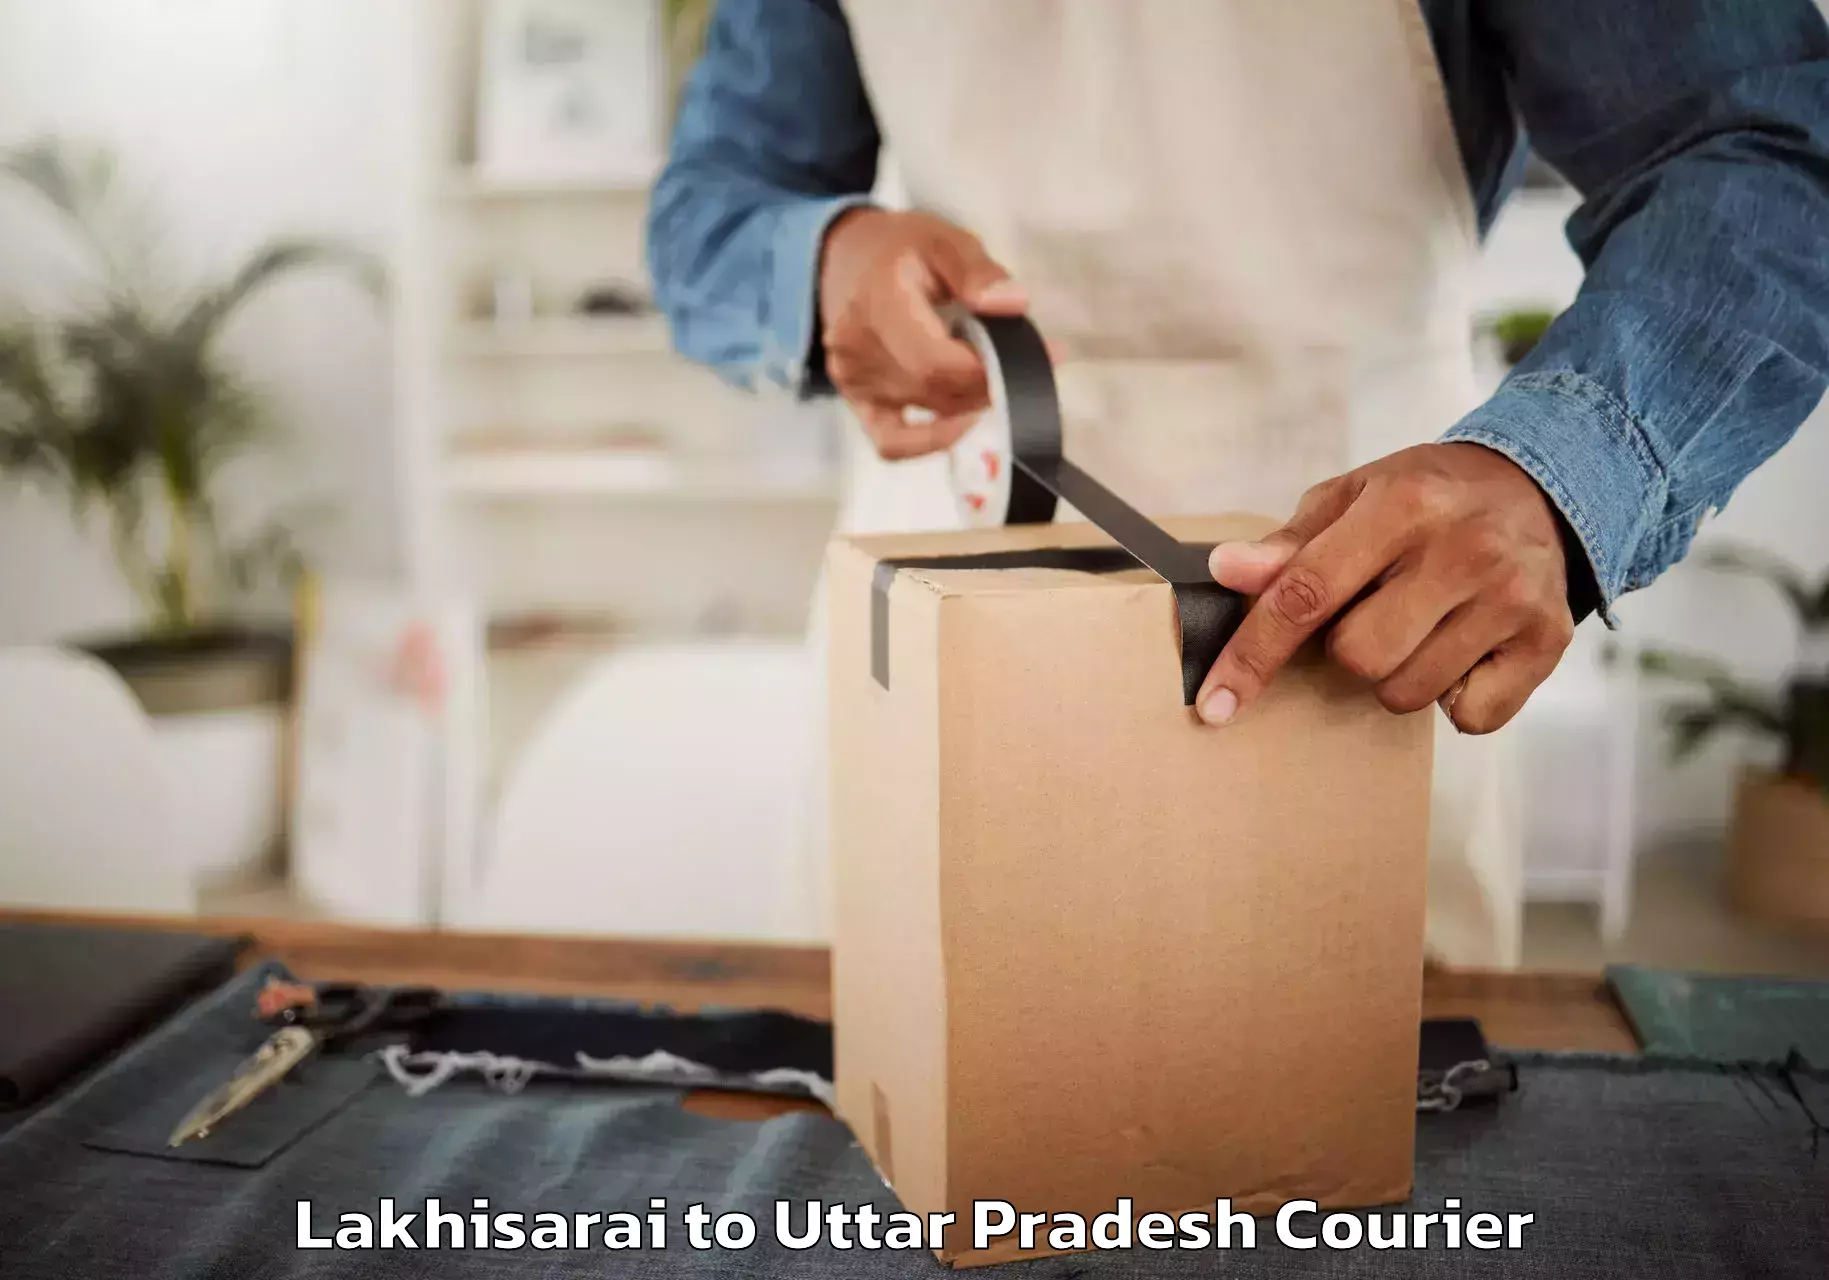 Hassle-free relocation in Lakhisarai to Deoria